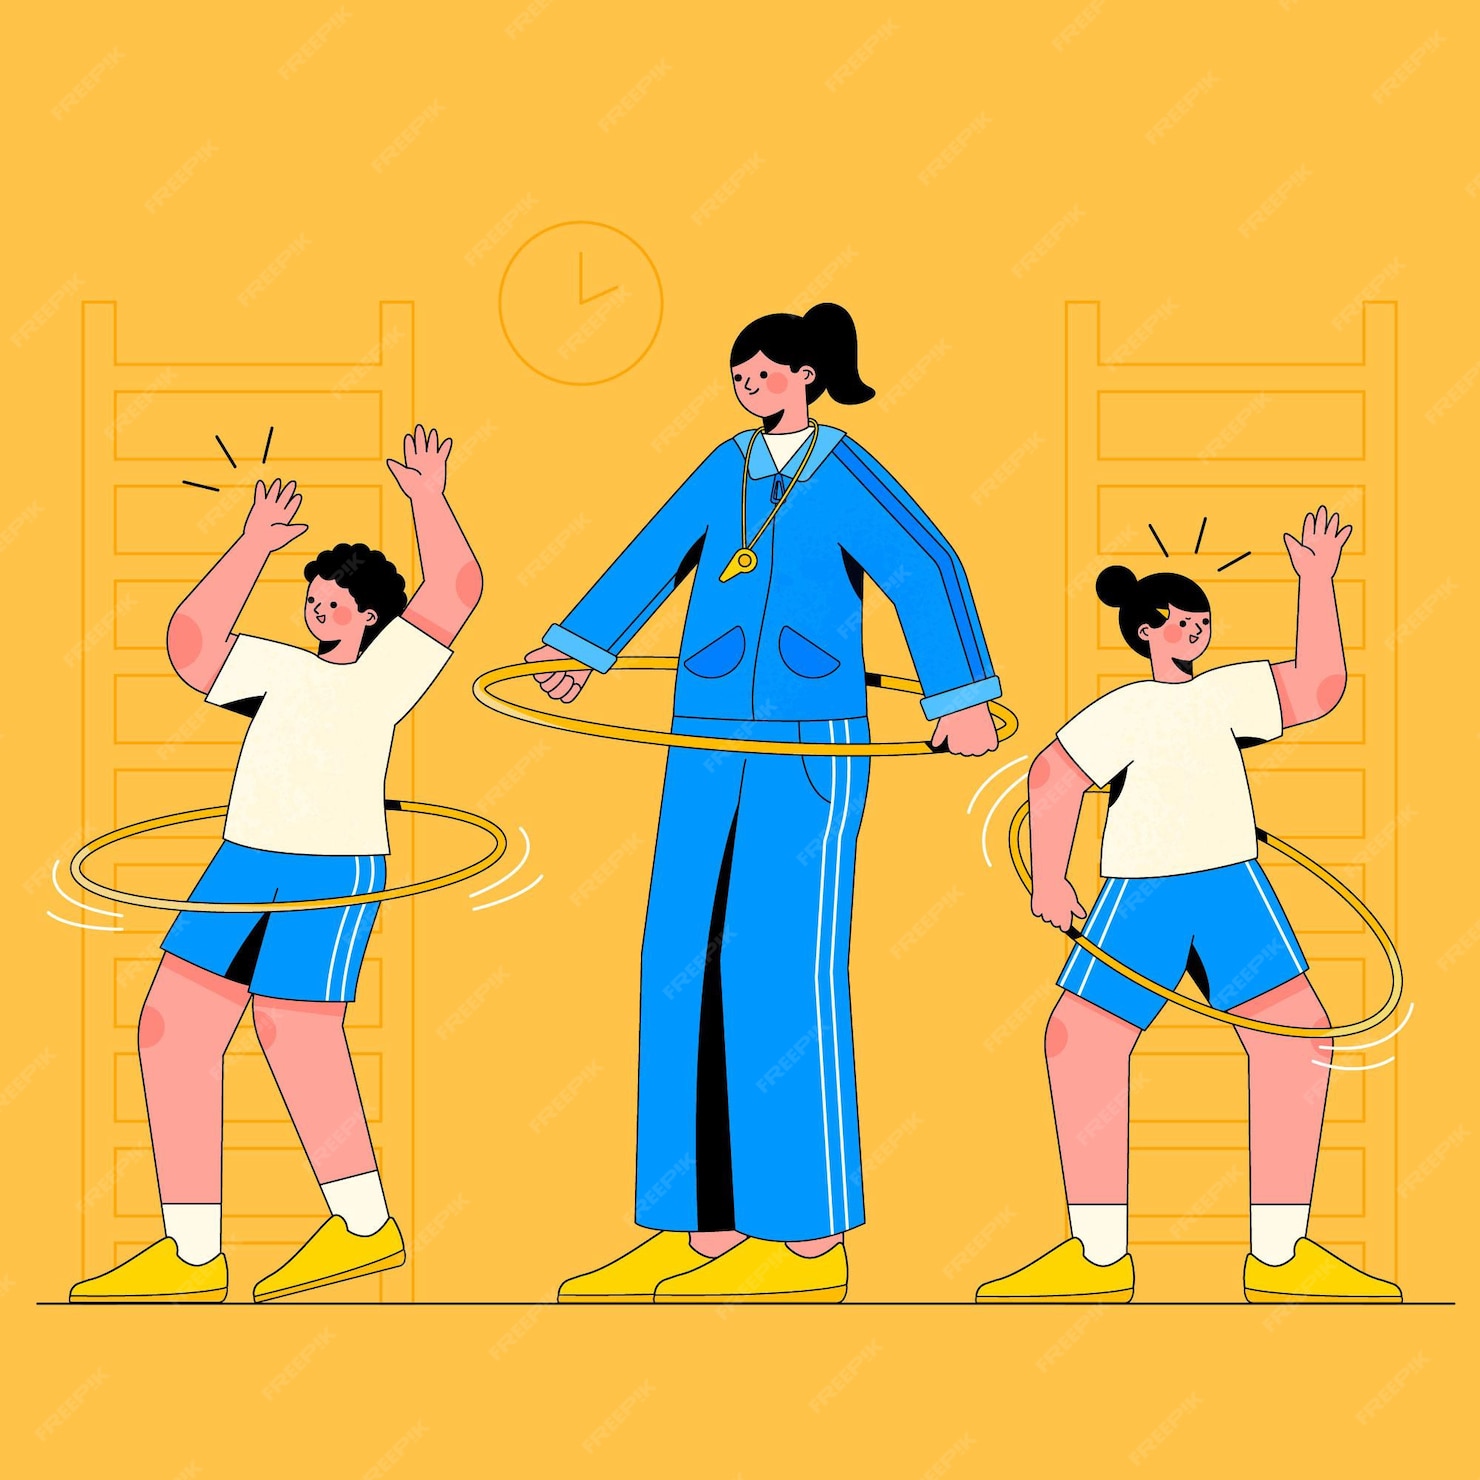 premium-vector-illustration-of-children-in-physical-education-class